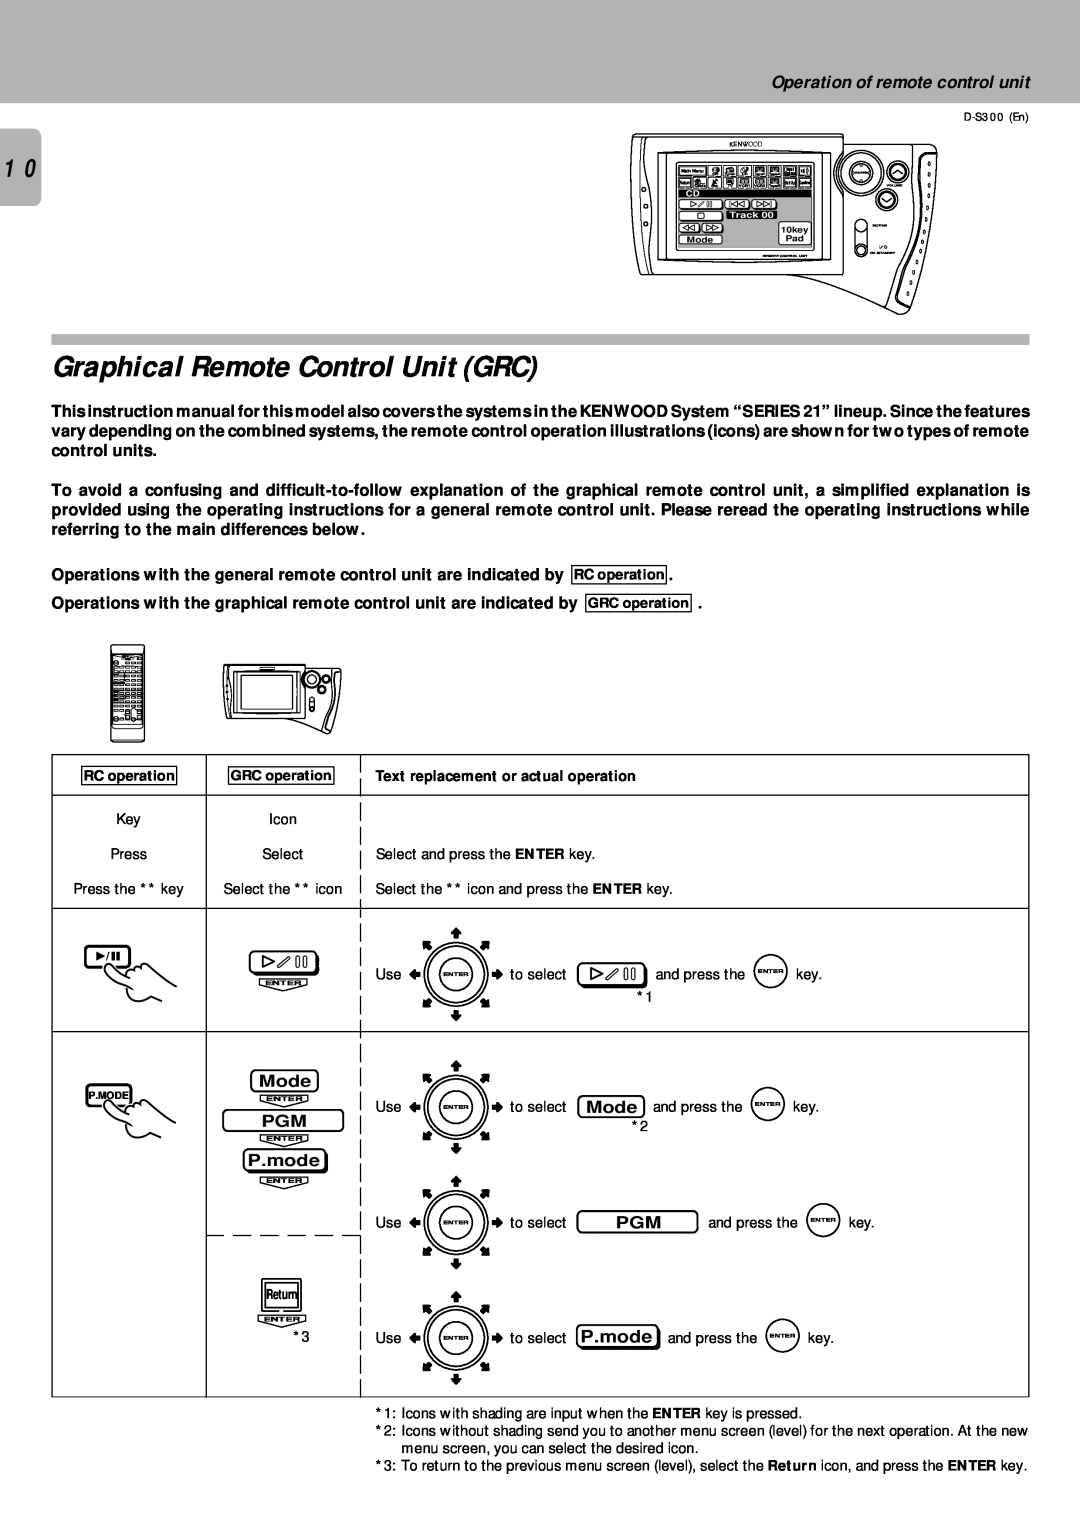 Kenwood D-S300 instruction manual Graphical Remote Control Unit GRC, Operation of remote control unit, P.mode, Mode 